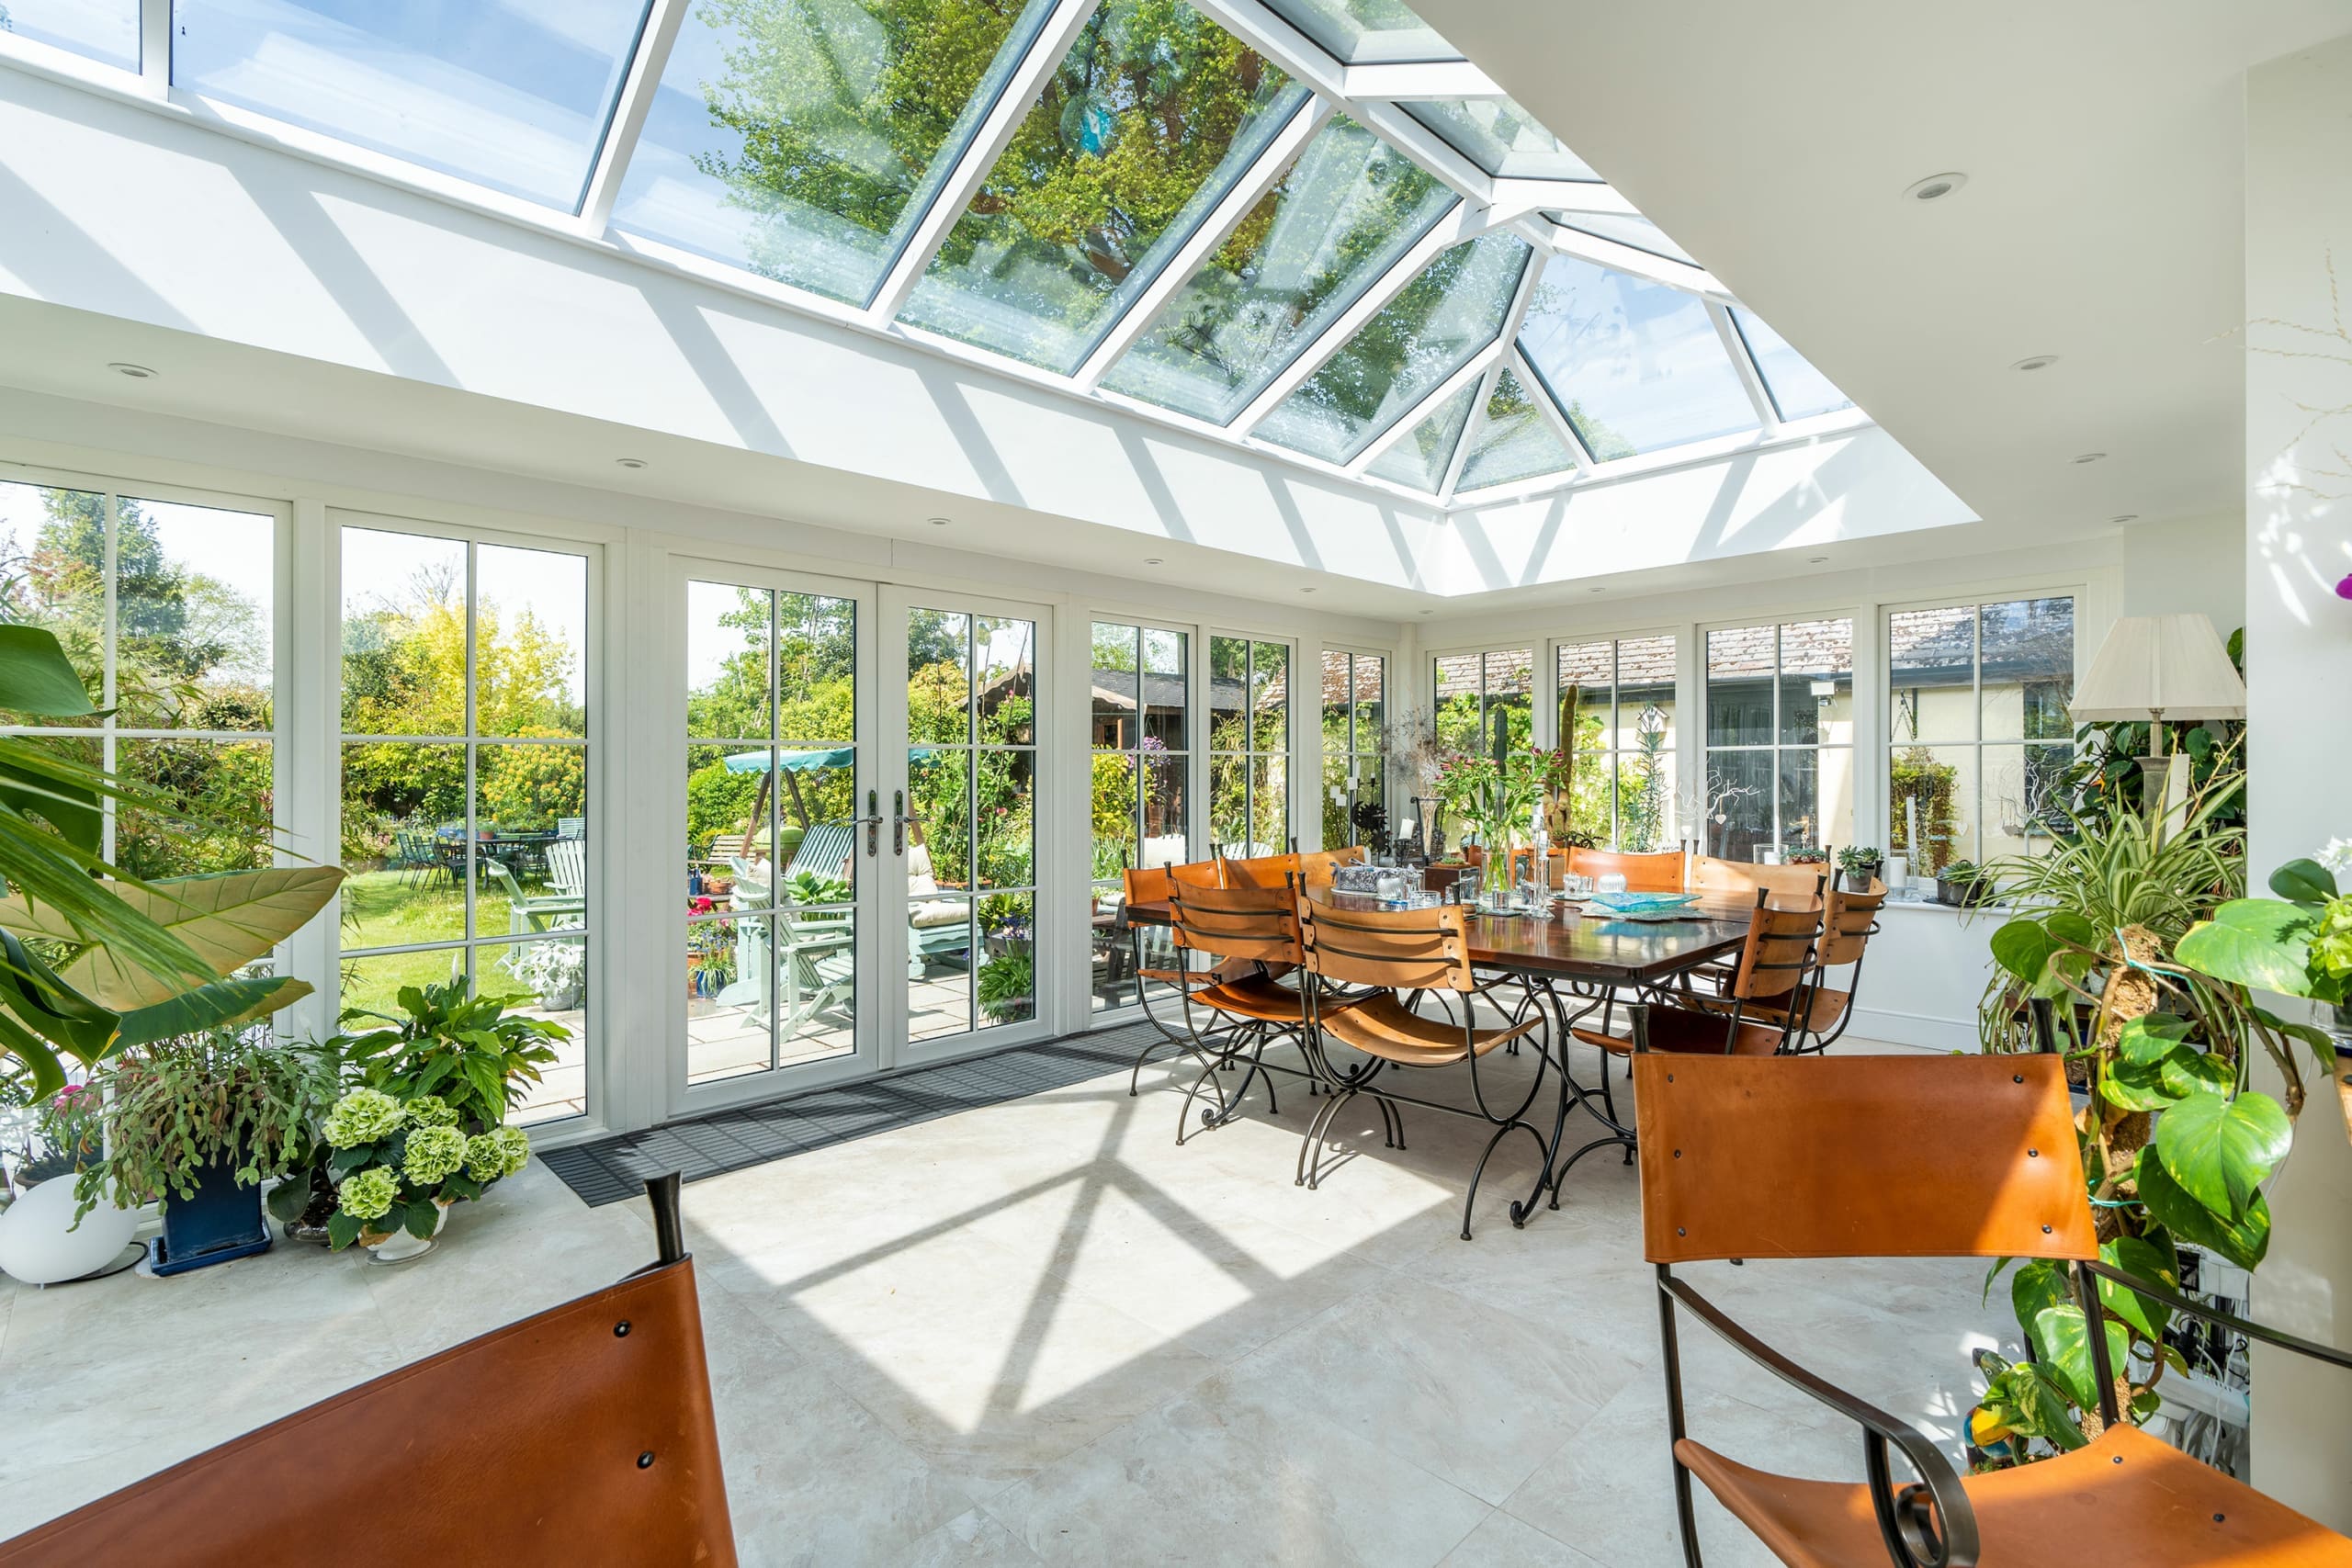 Interior of a stunning garden room with roof lantern and dining furniture.